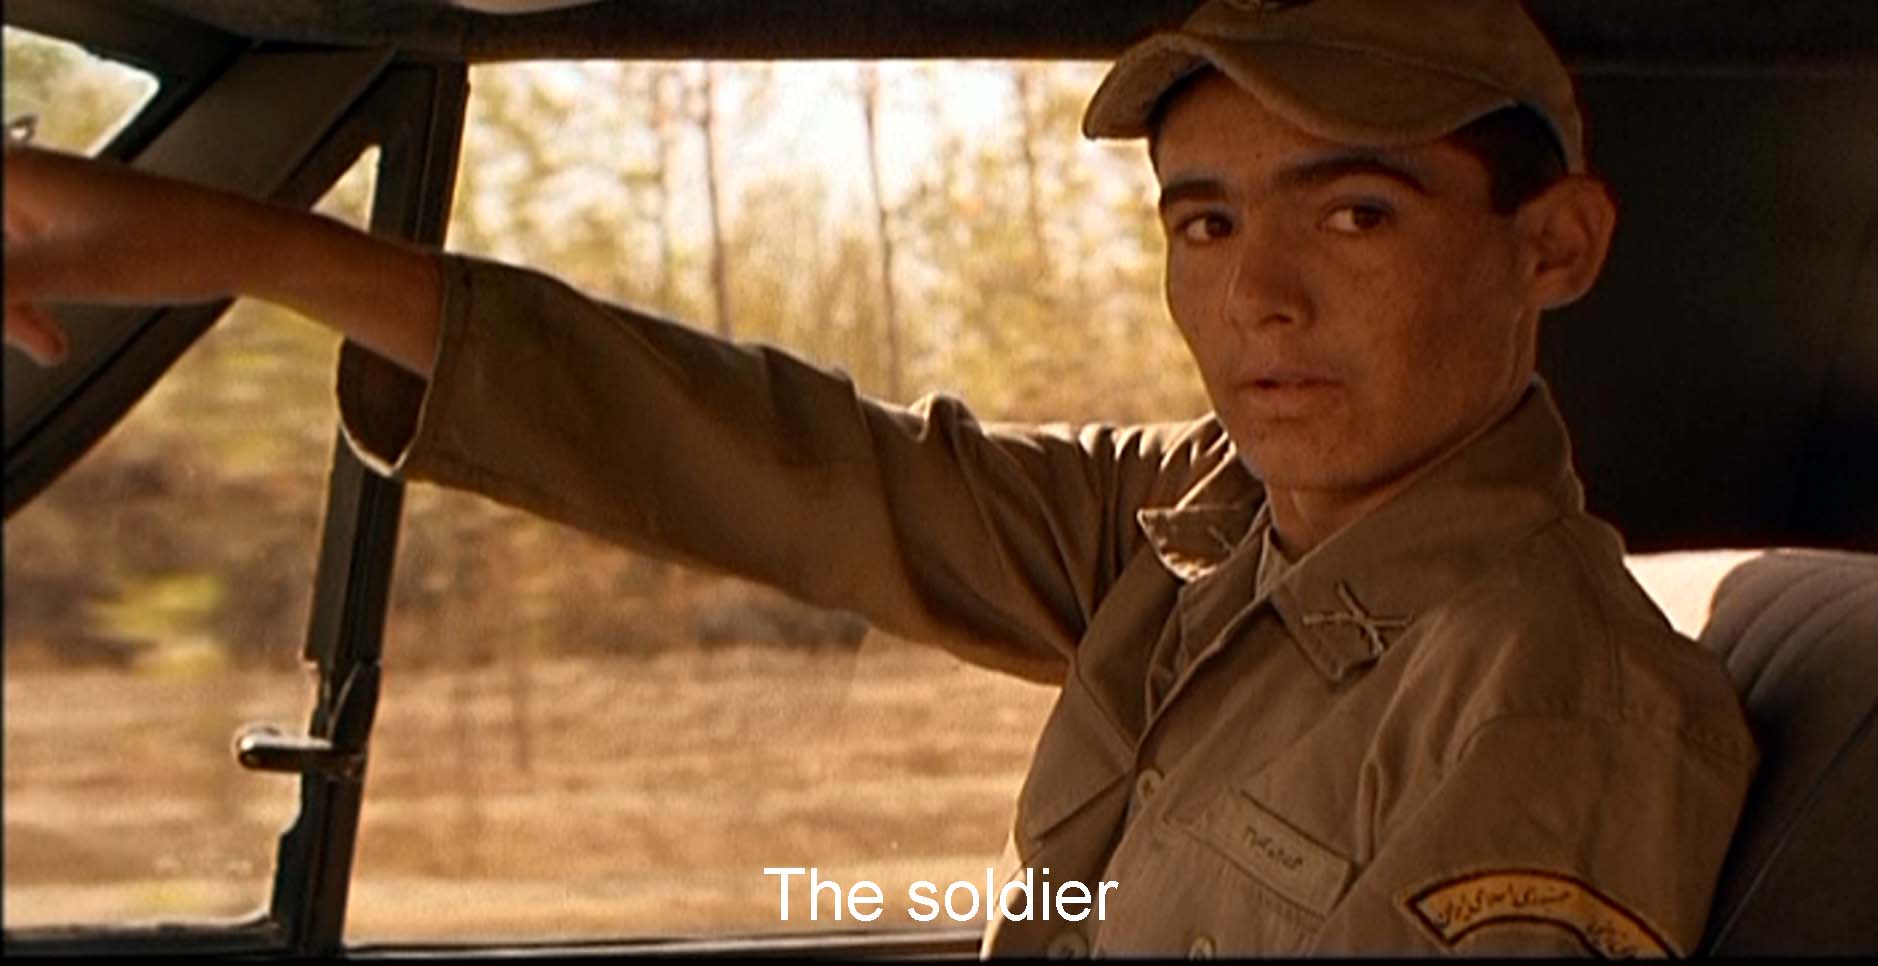 The soldier